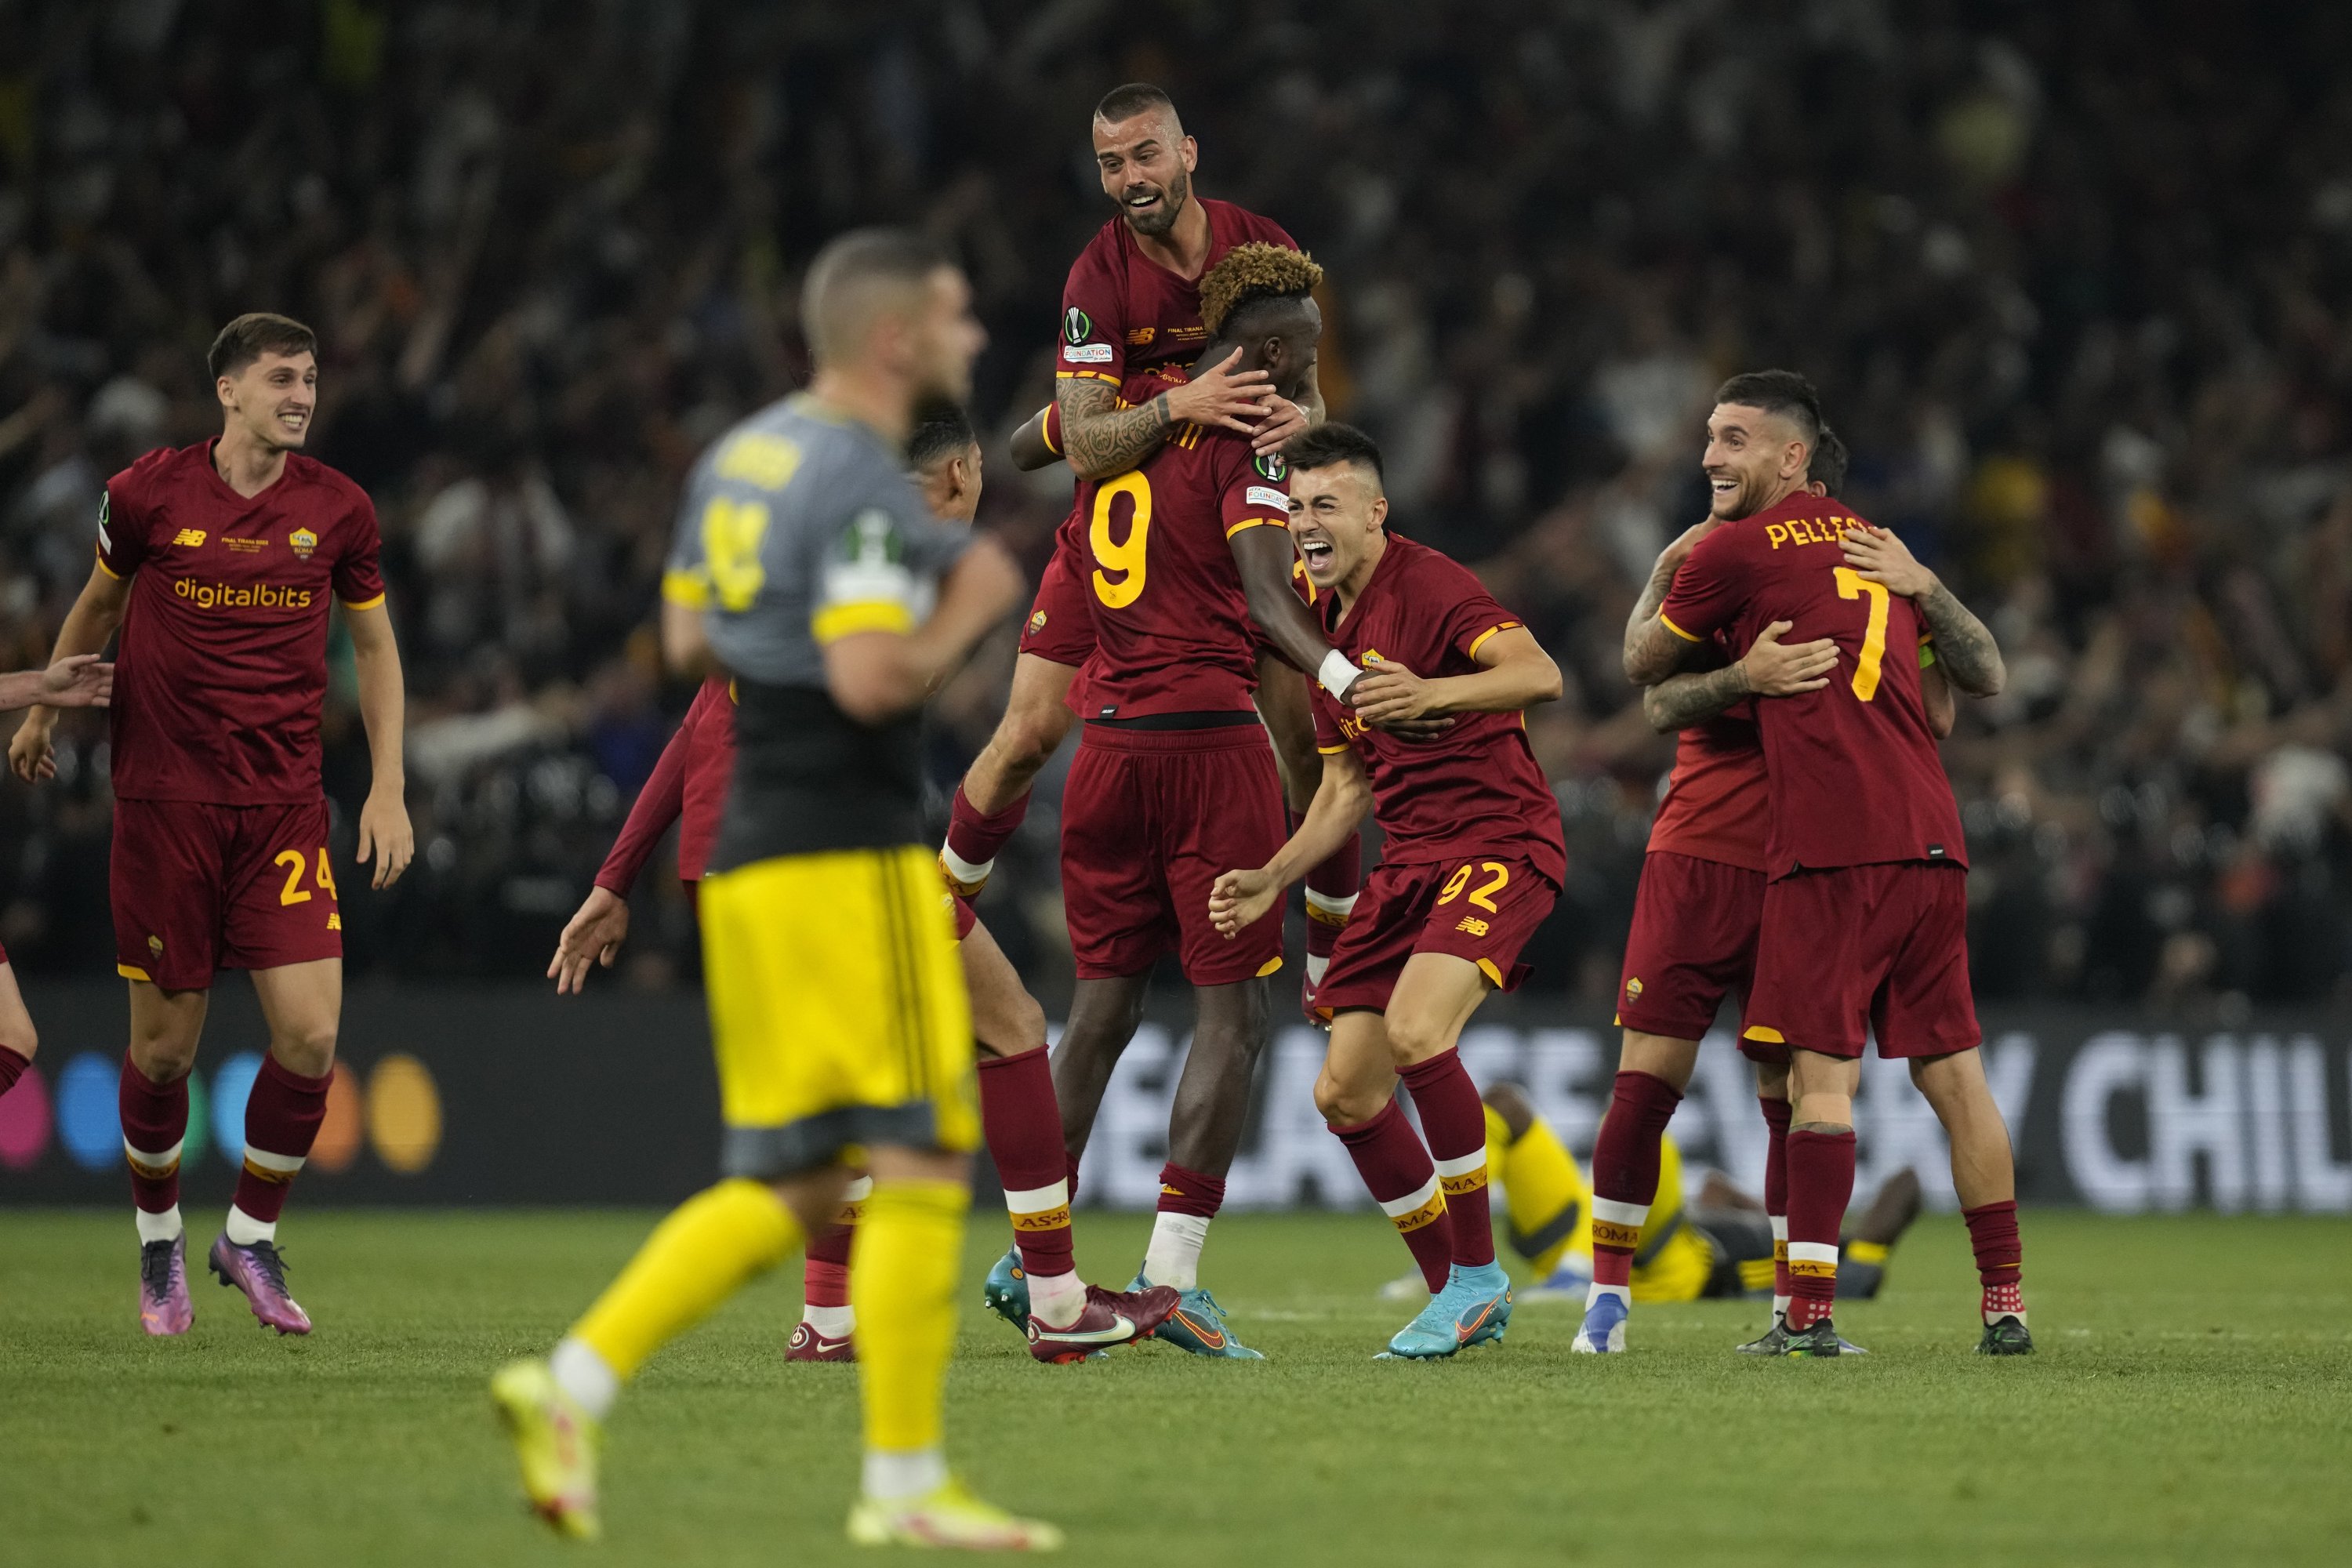 Roma players celebrate winning the Europa Conference League final soccer match between AS Roma and Feyenoord at National Arena in Tirana, Albania, May 25, 2022. (AP Photo)